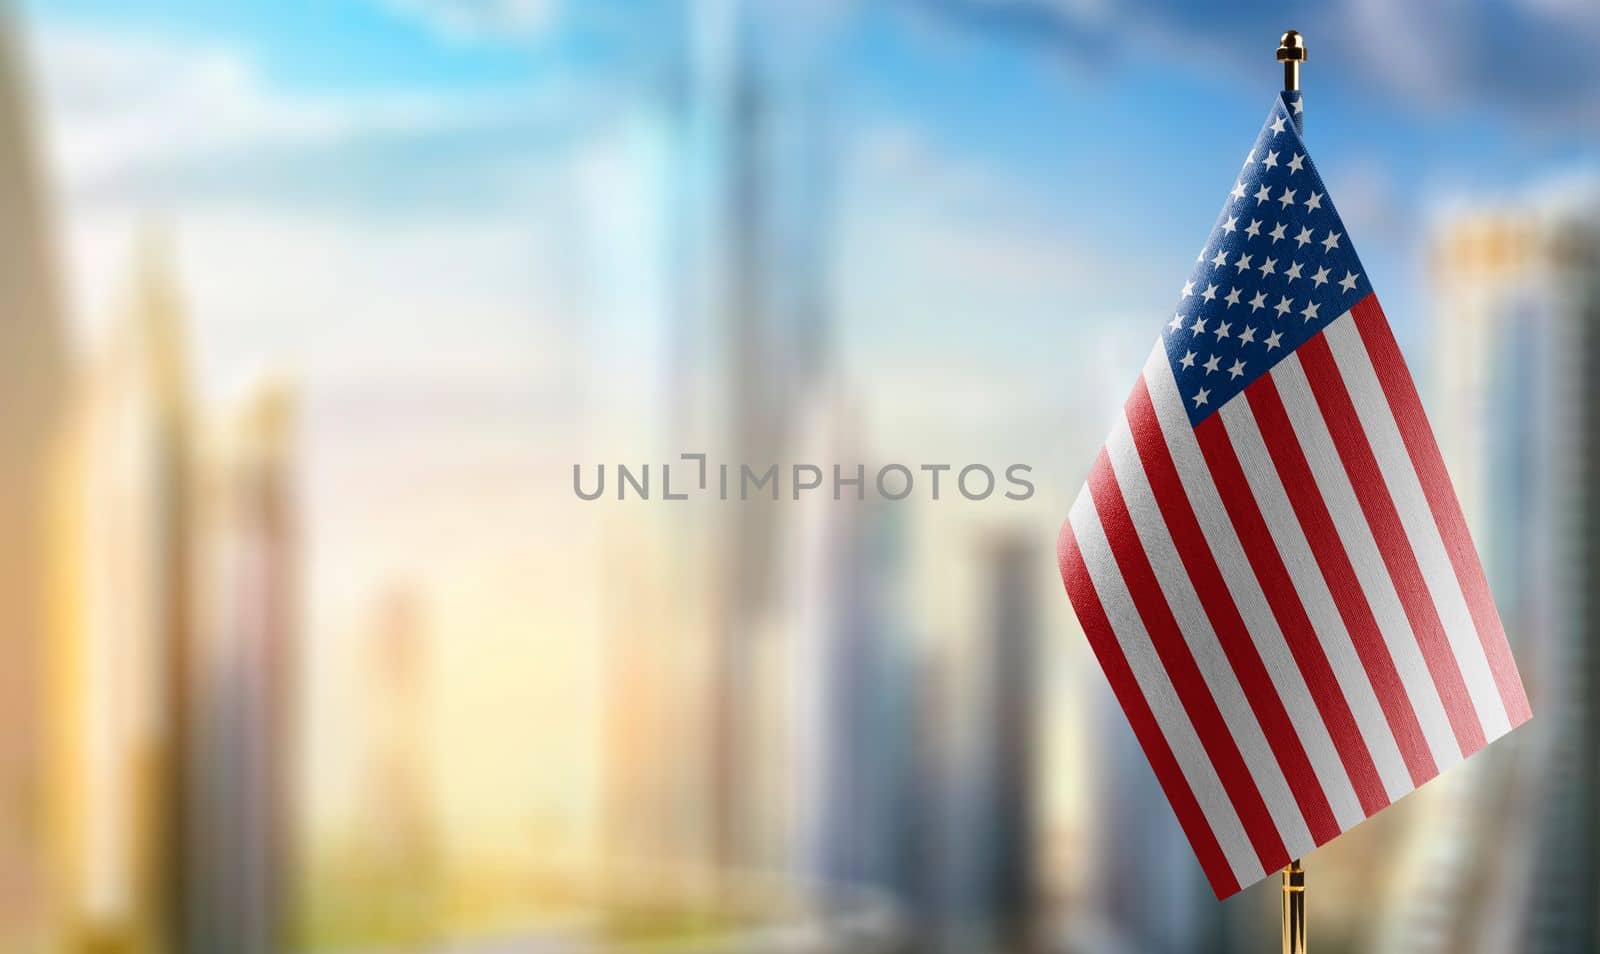 Small flags of the USA on an abstract blurry background.